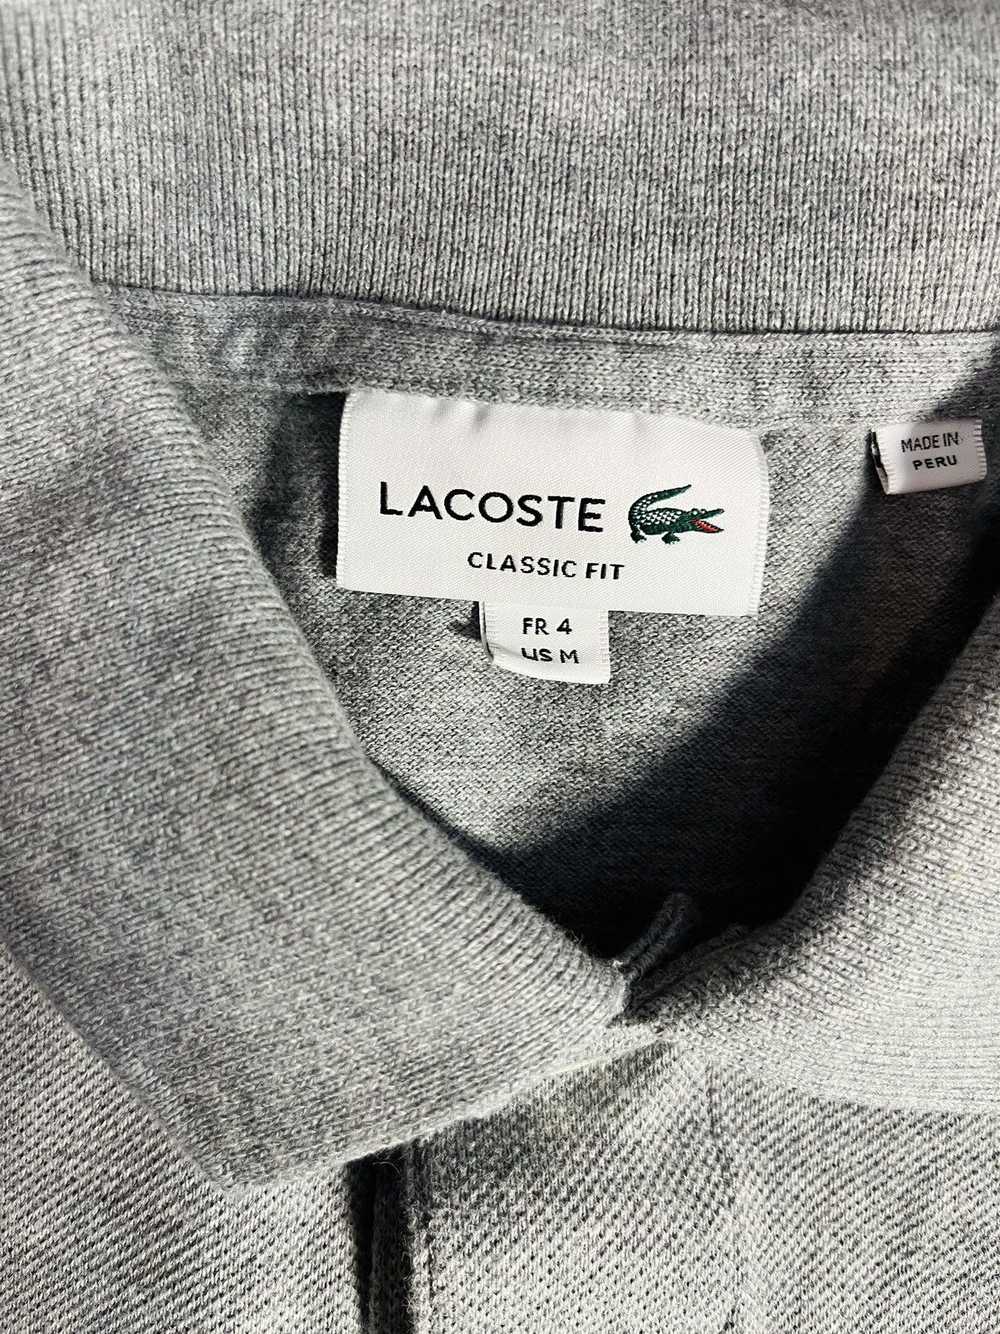 Lacoste Lacoste Classic Fit Polo - image 2